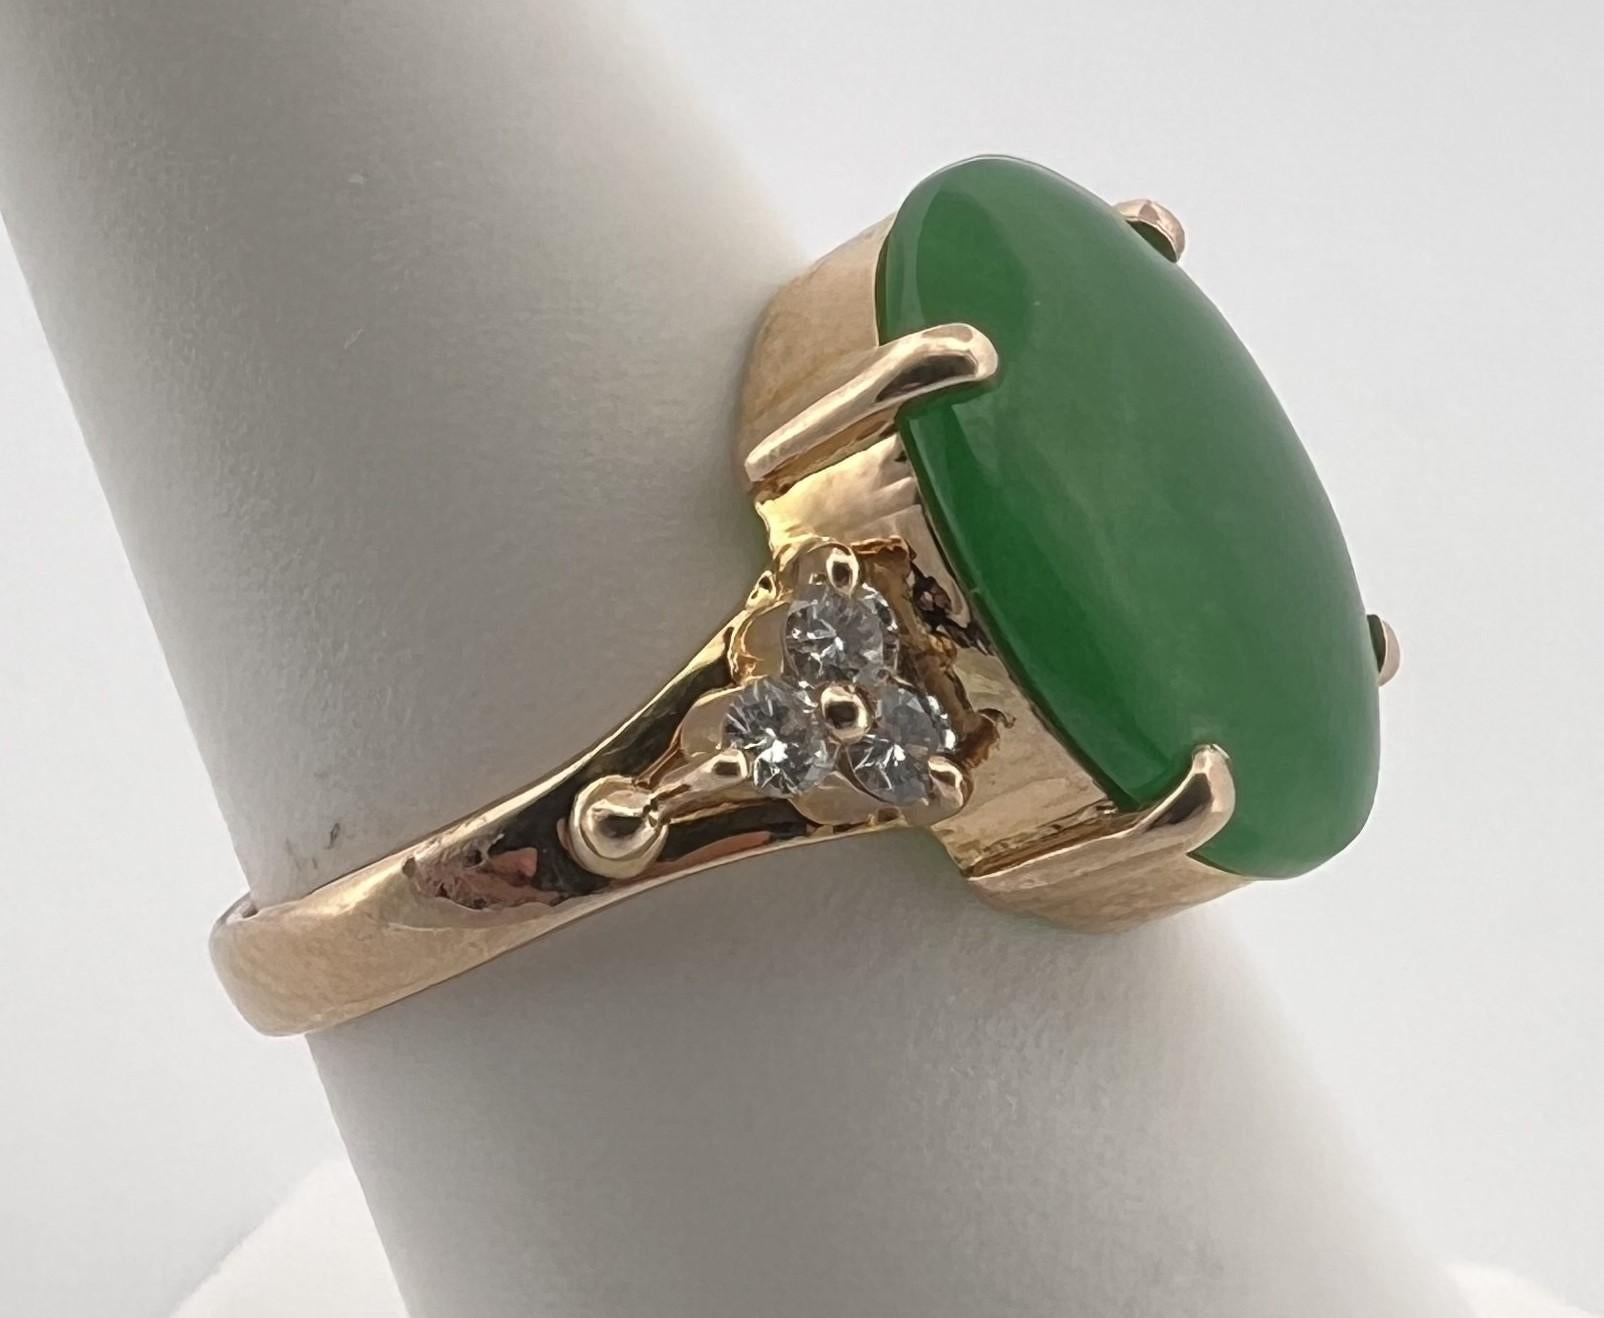 Green Jade Weight: 7.50ct

Diamond Count: 6 Round Brillant Diamonds

Diamond Weight: .80ct 

Diamond Color: F-H

Diamond Clarity: SI1-SI2

Ring Size: 4.5

Item Weight: 5.4 grams 

Stamped: 18k

Condition: Excellent 
